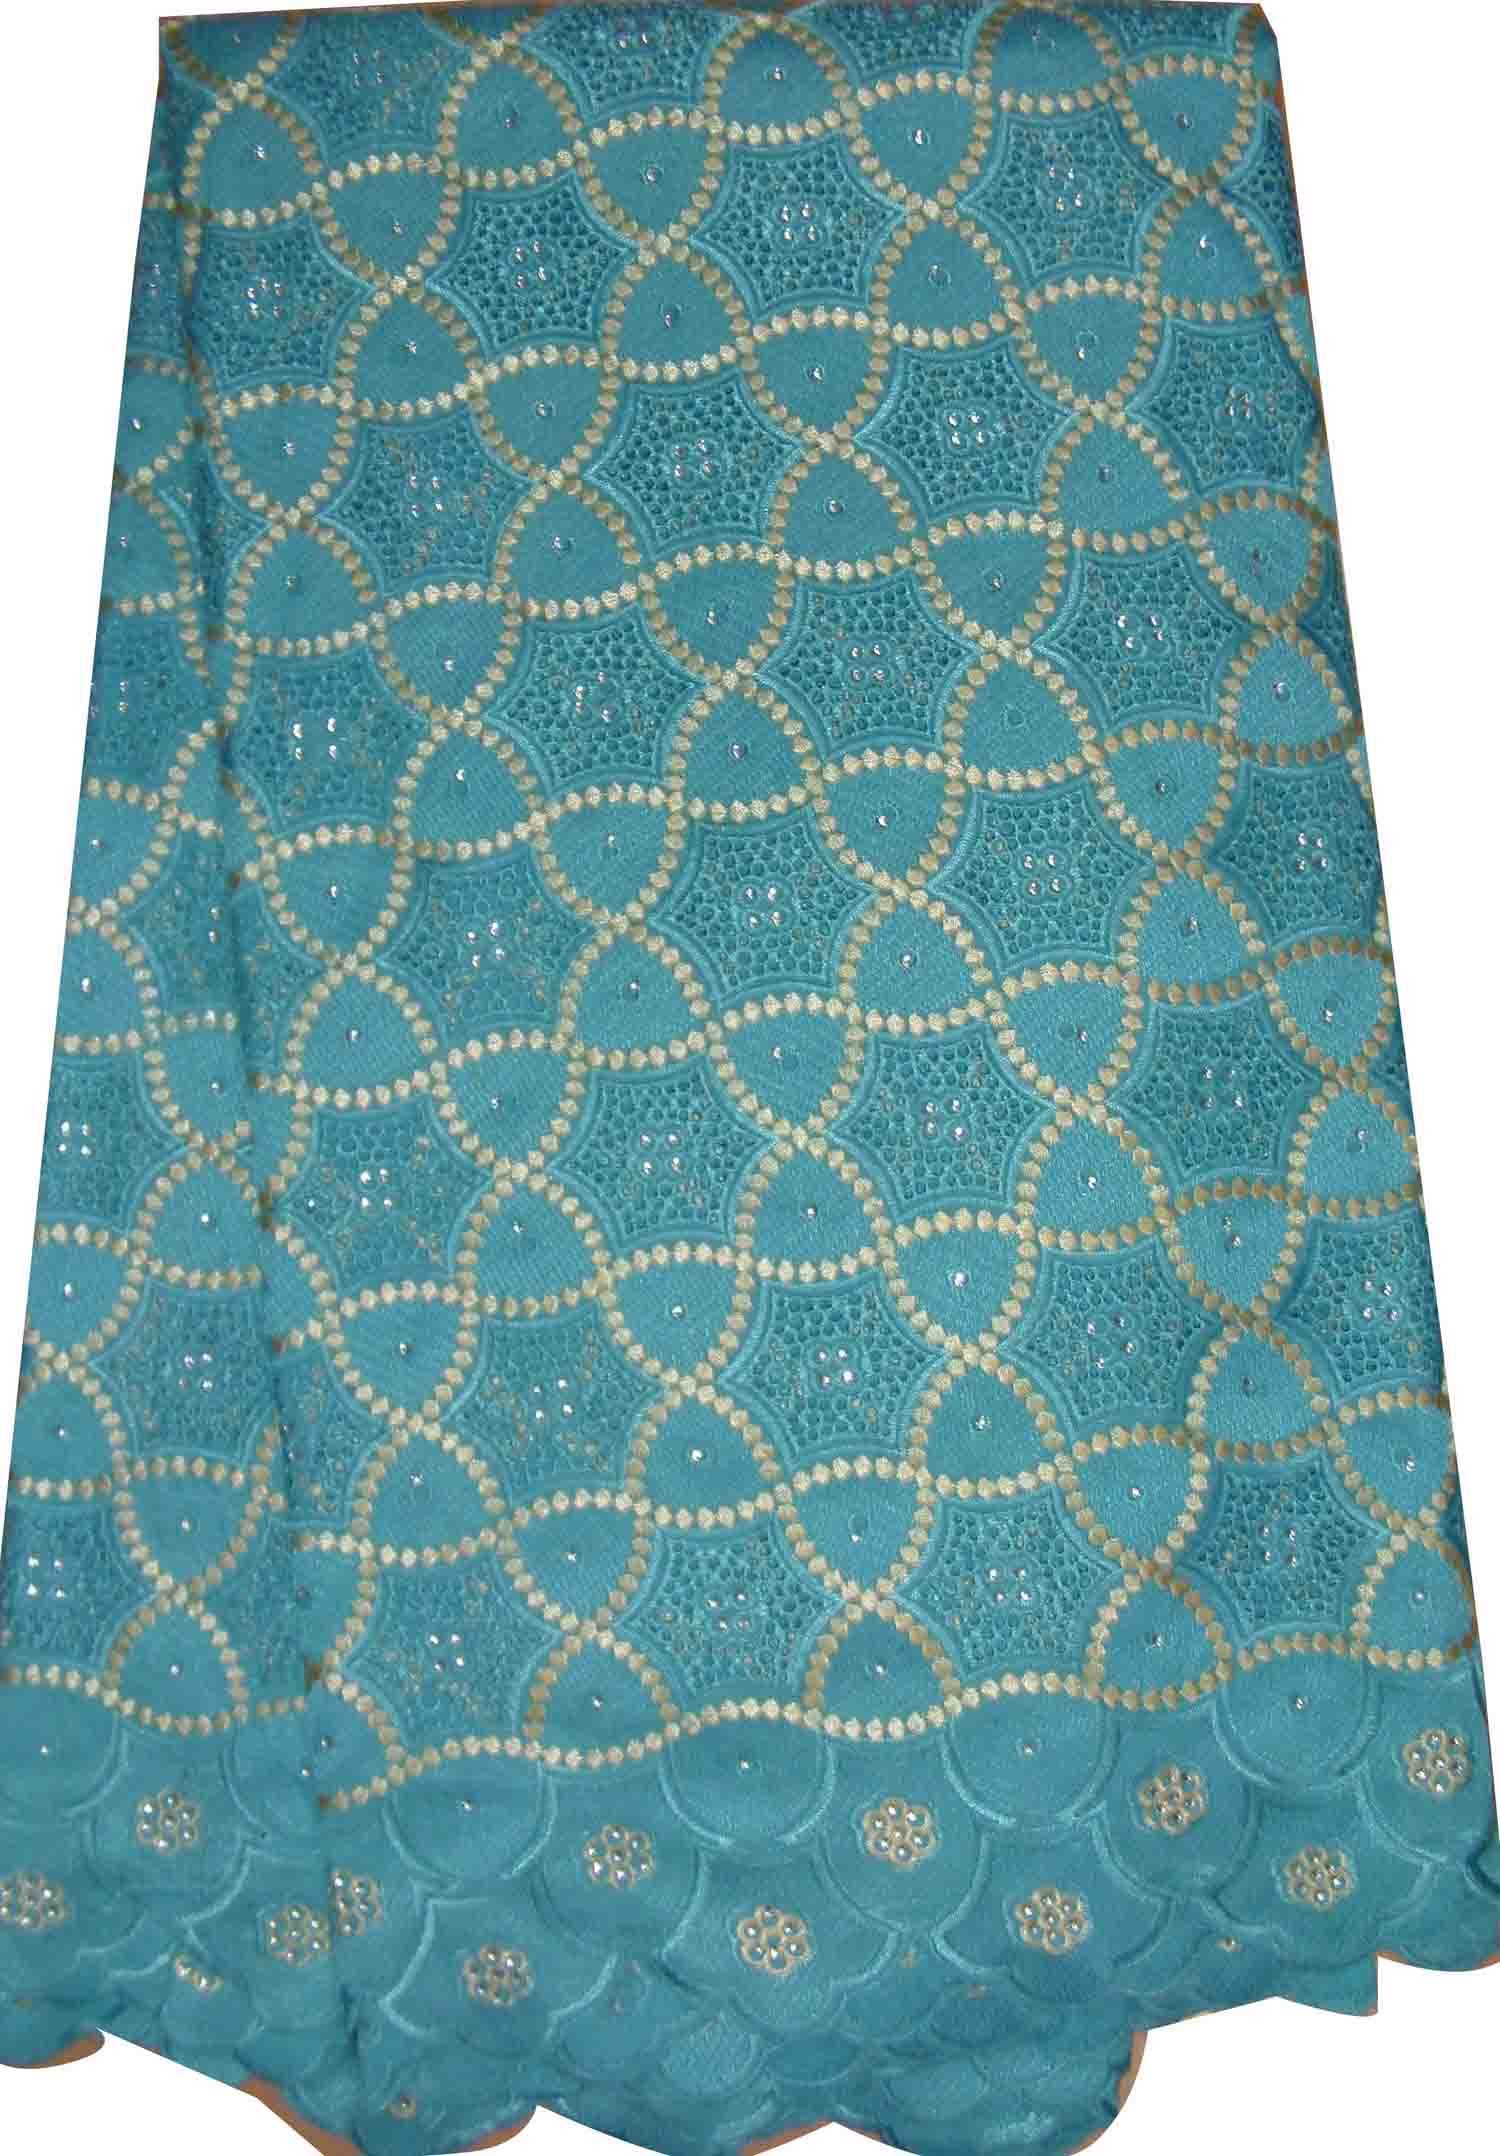 Women New Design of Cotton Lace Fabric with Blue Color Cl8189-2